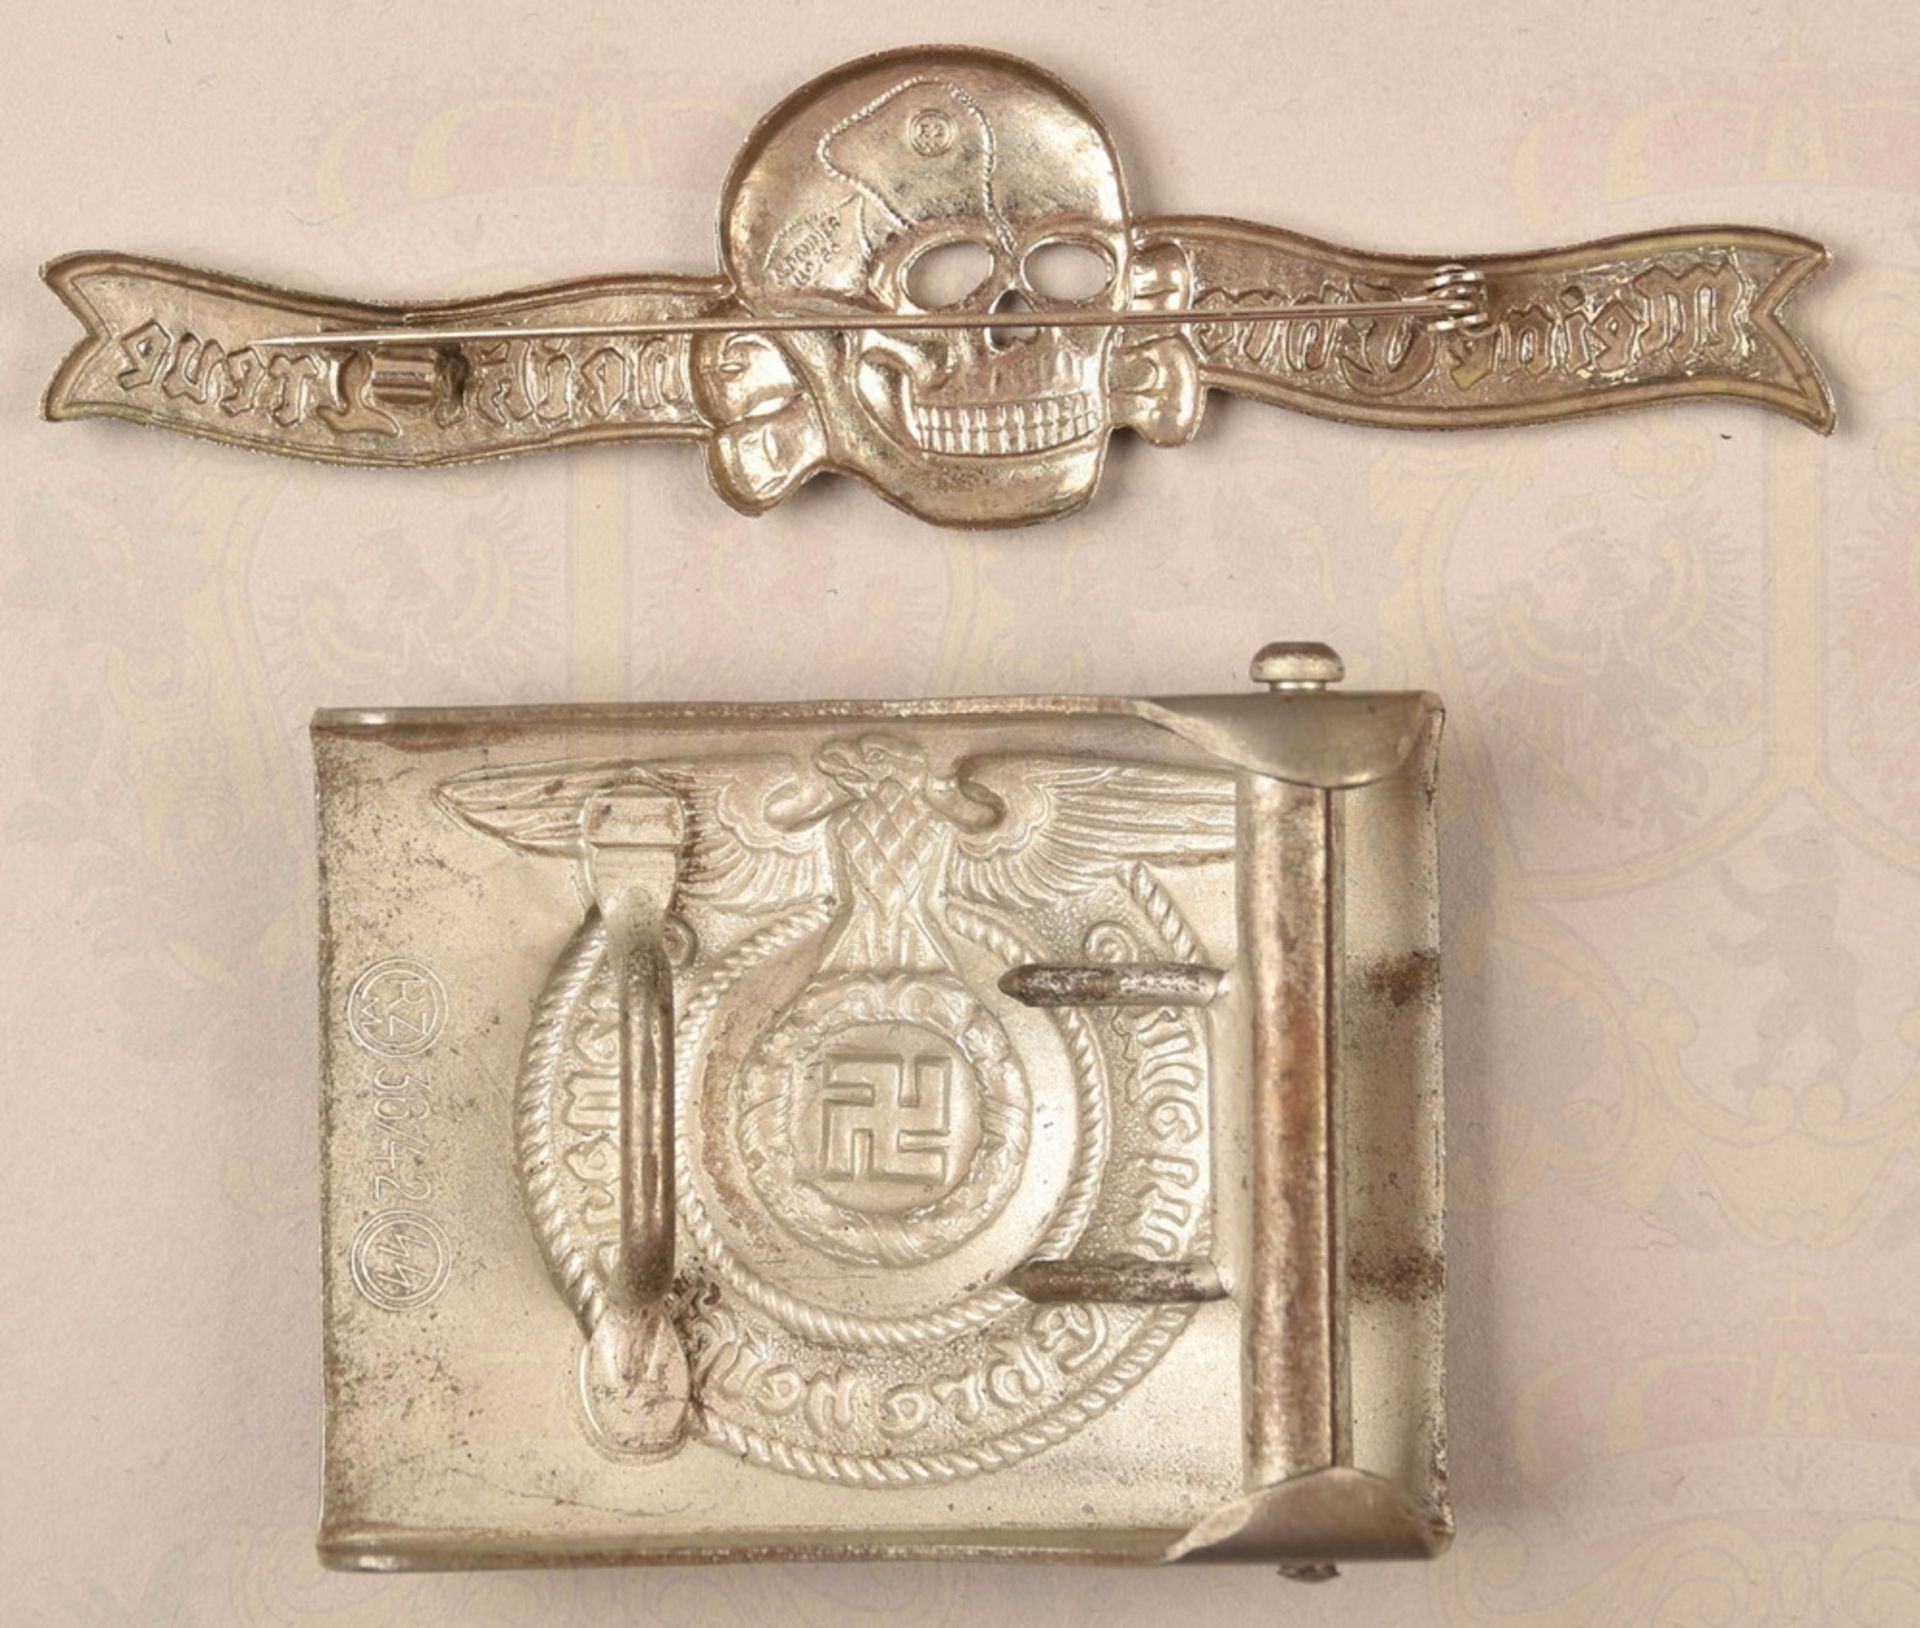 Waffen-SS belt buckle and SS gala badge - Image 3 of 3